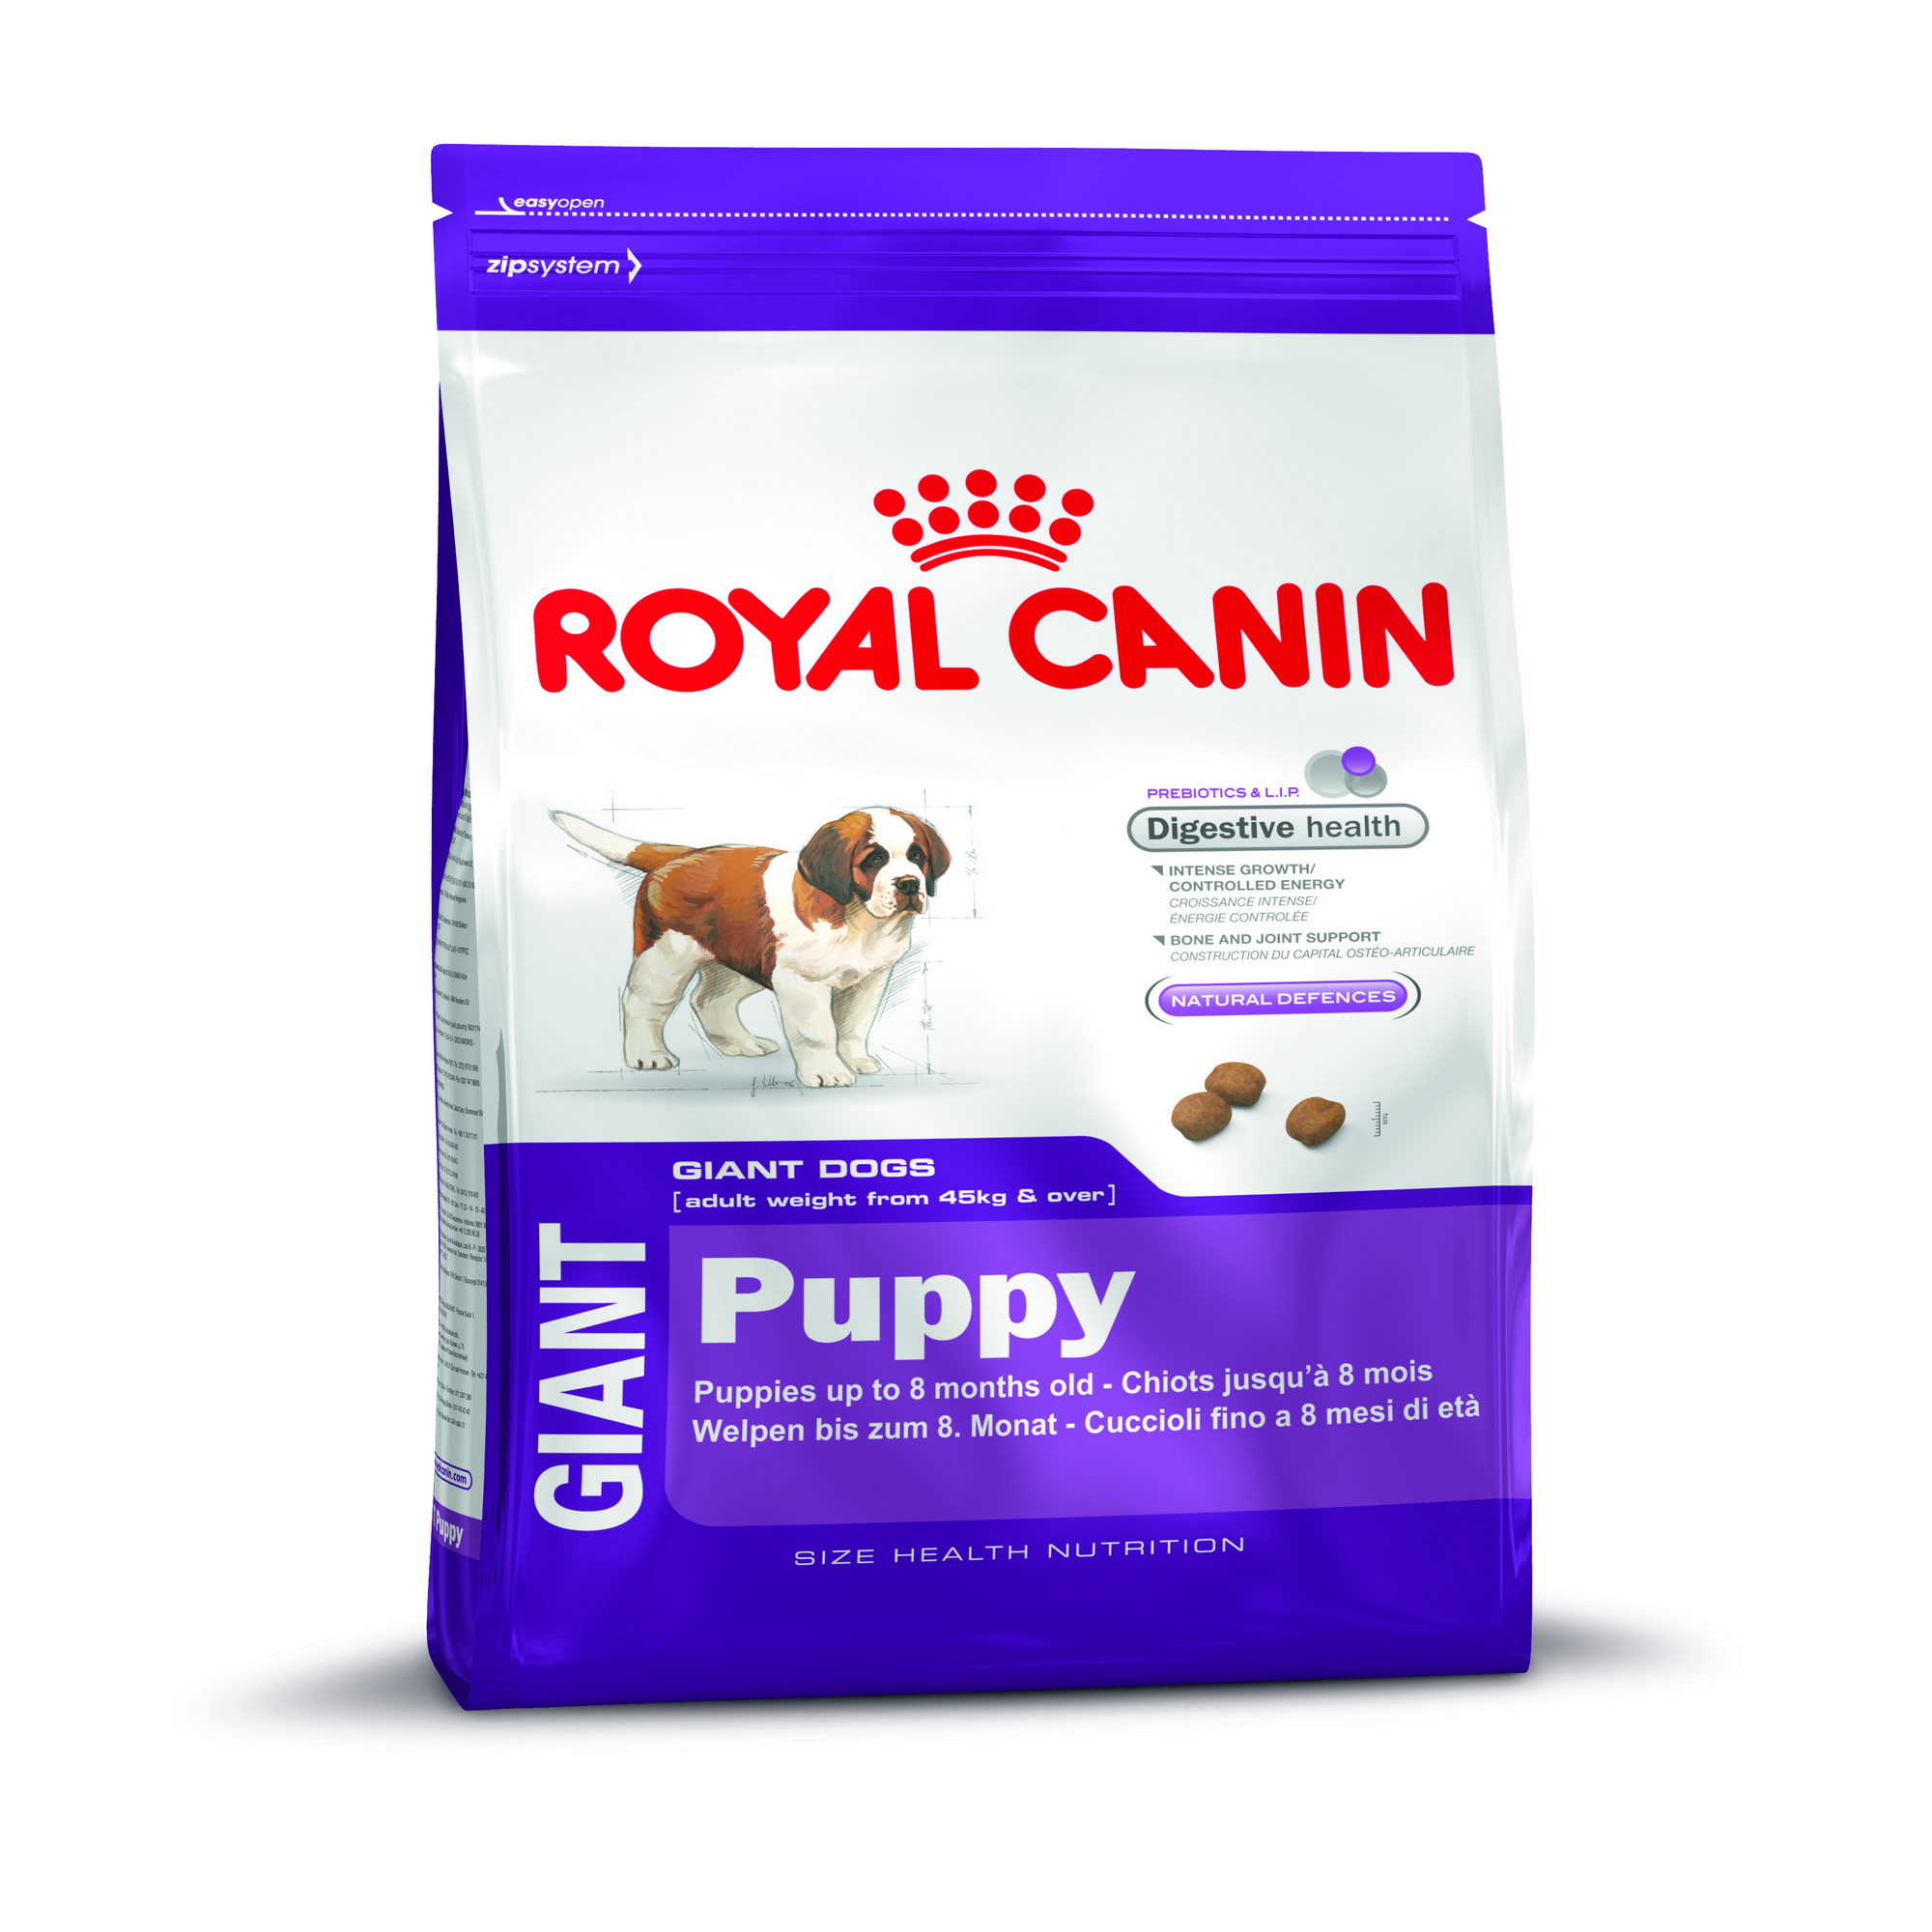 Royal Canin GIANT Puppy 15 Kg + product picture